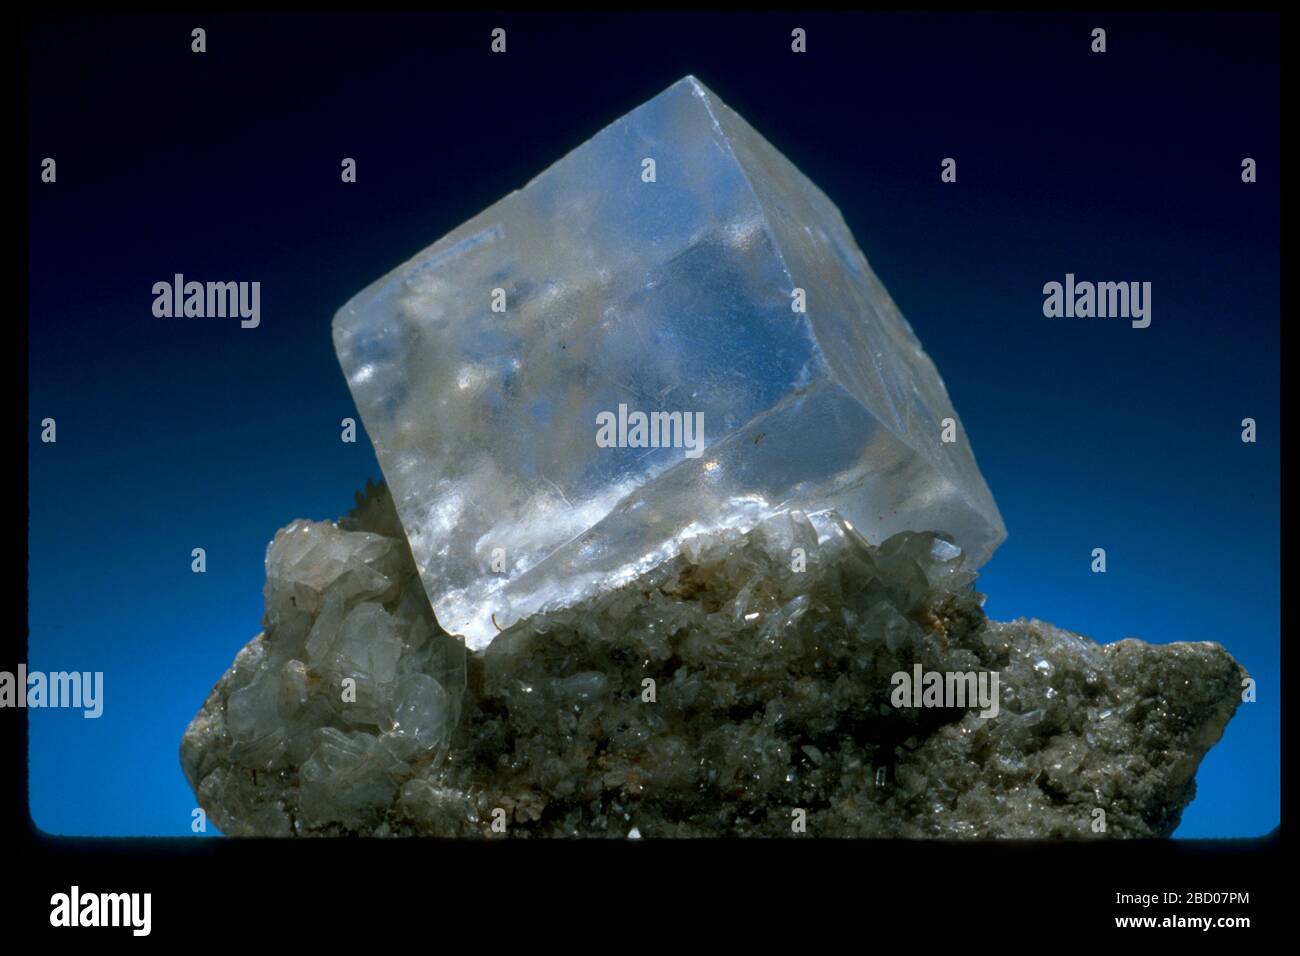 Photograph of a halite crystal (C877) from the National Mineral Collection Halite Stock Photo